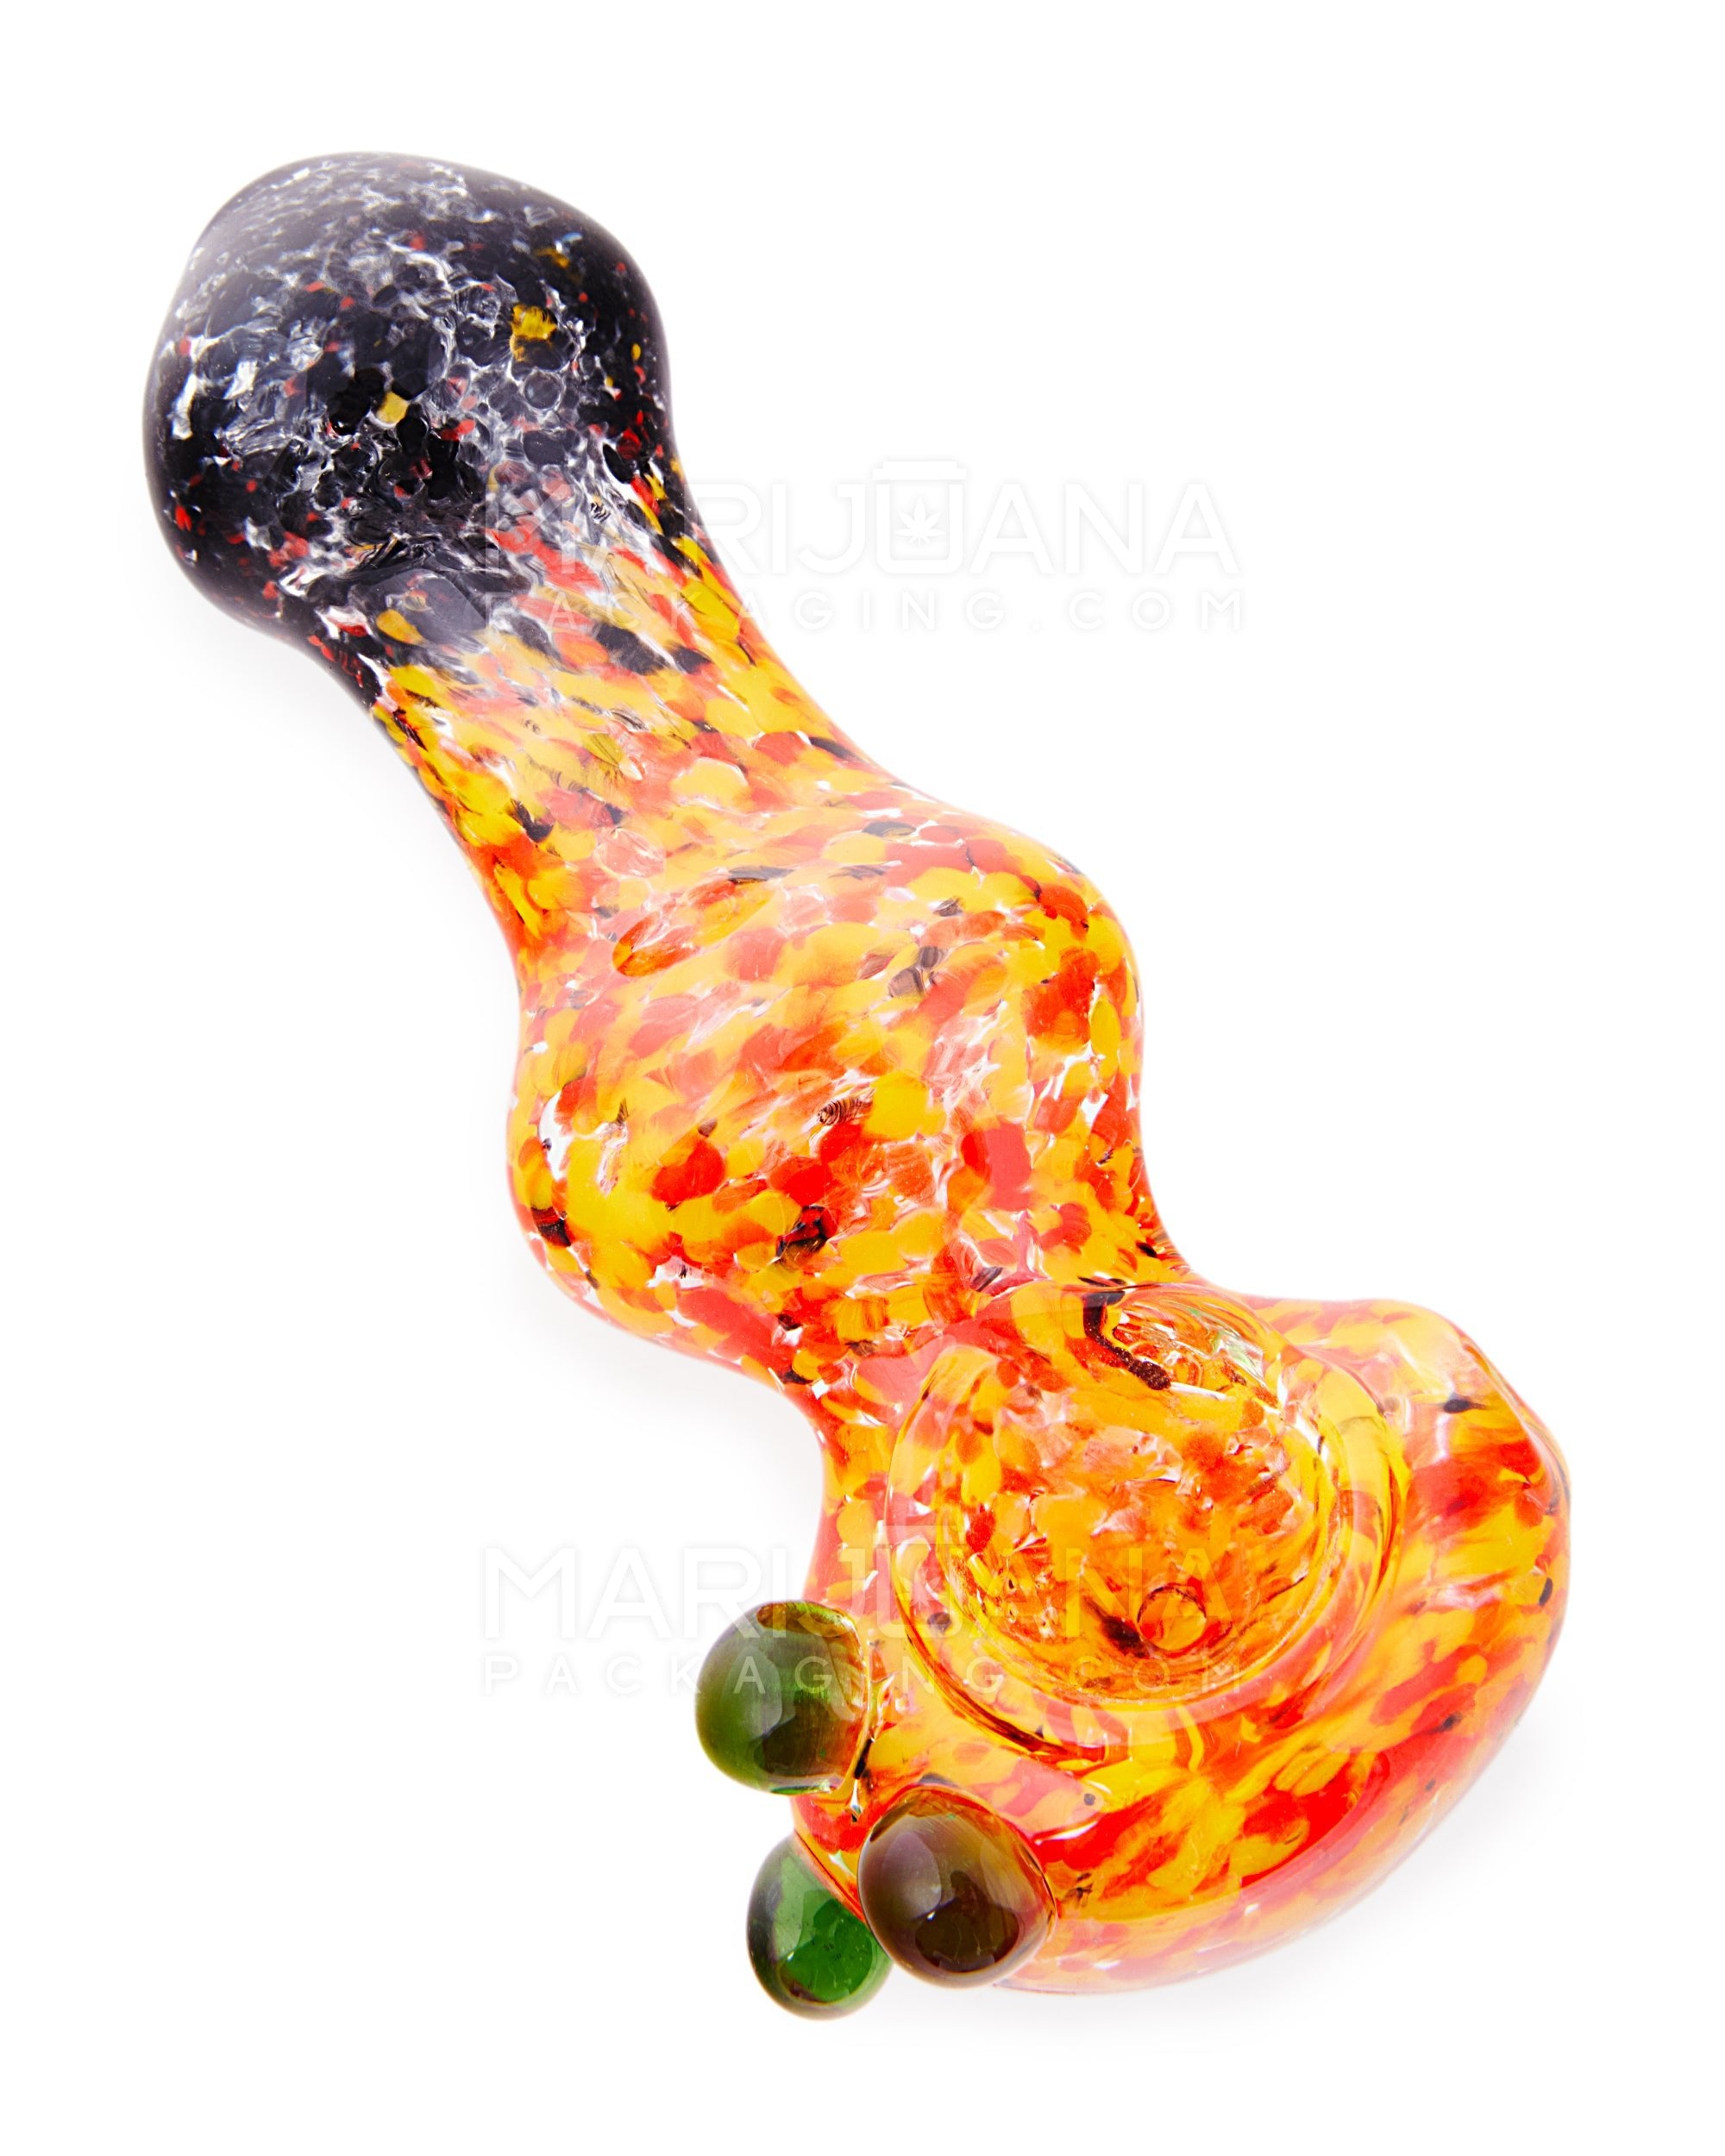 Splatter & Multi Frit Bulged Spoon Hand Pipe w/ Double Knockers | 5in Long - Glass - Assorted - 1